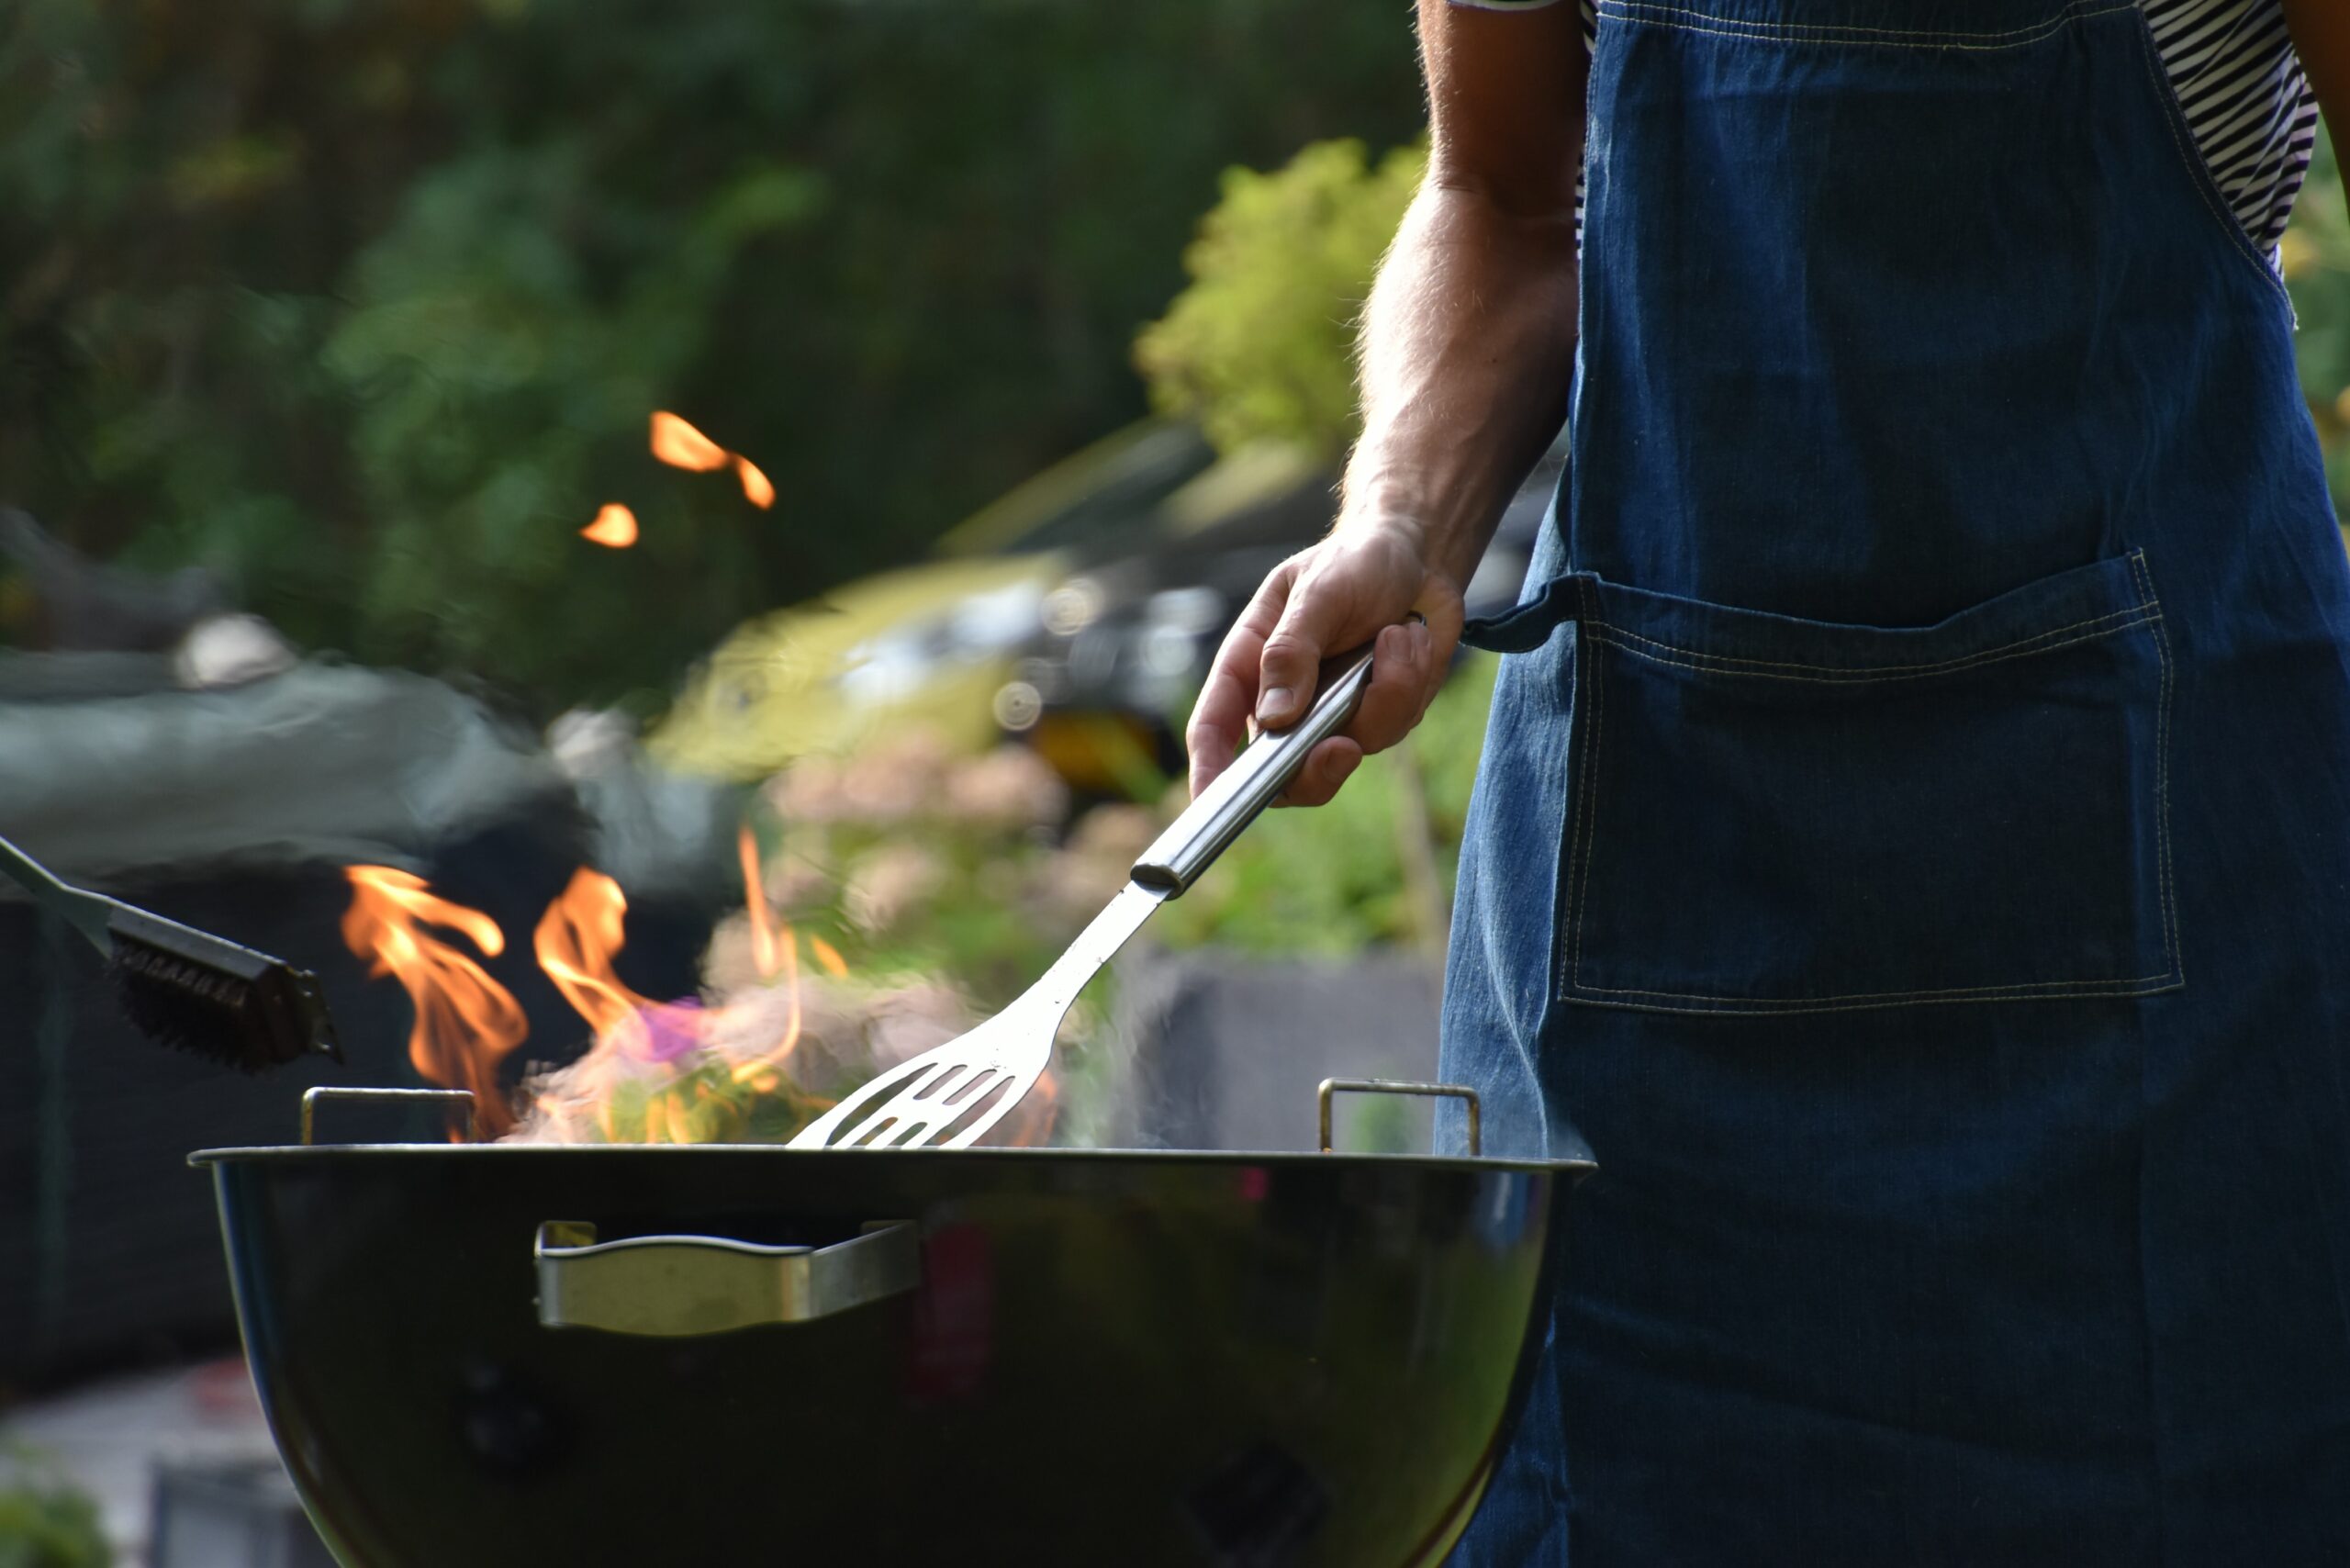 Image of someone cooking on a Barbecue